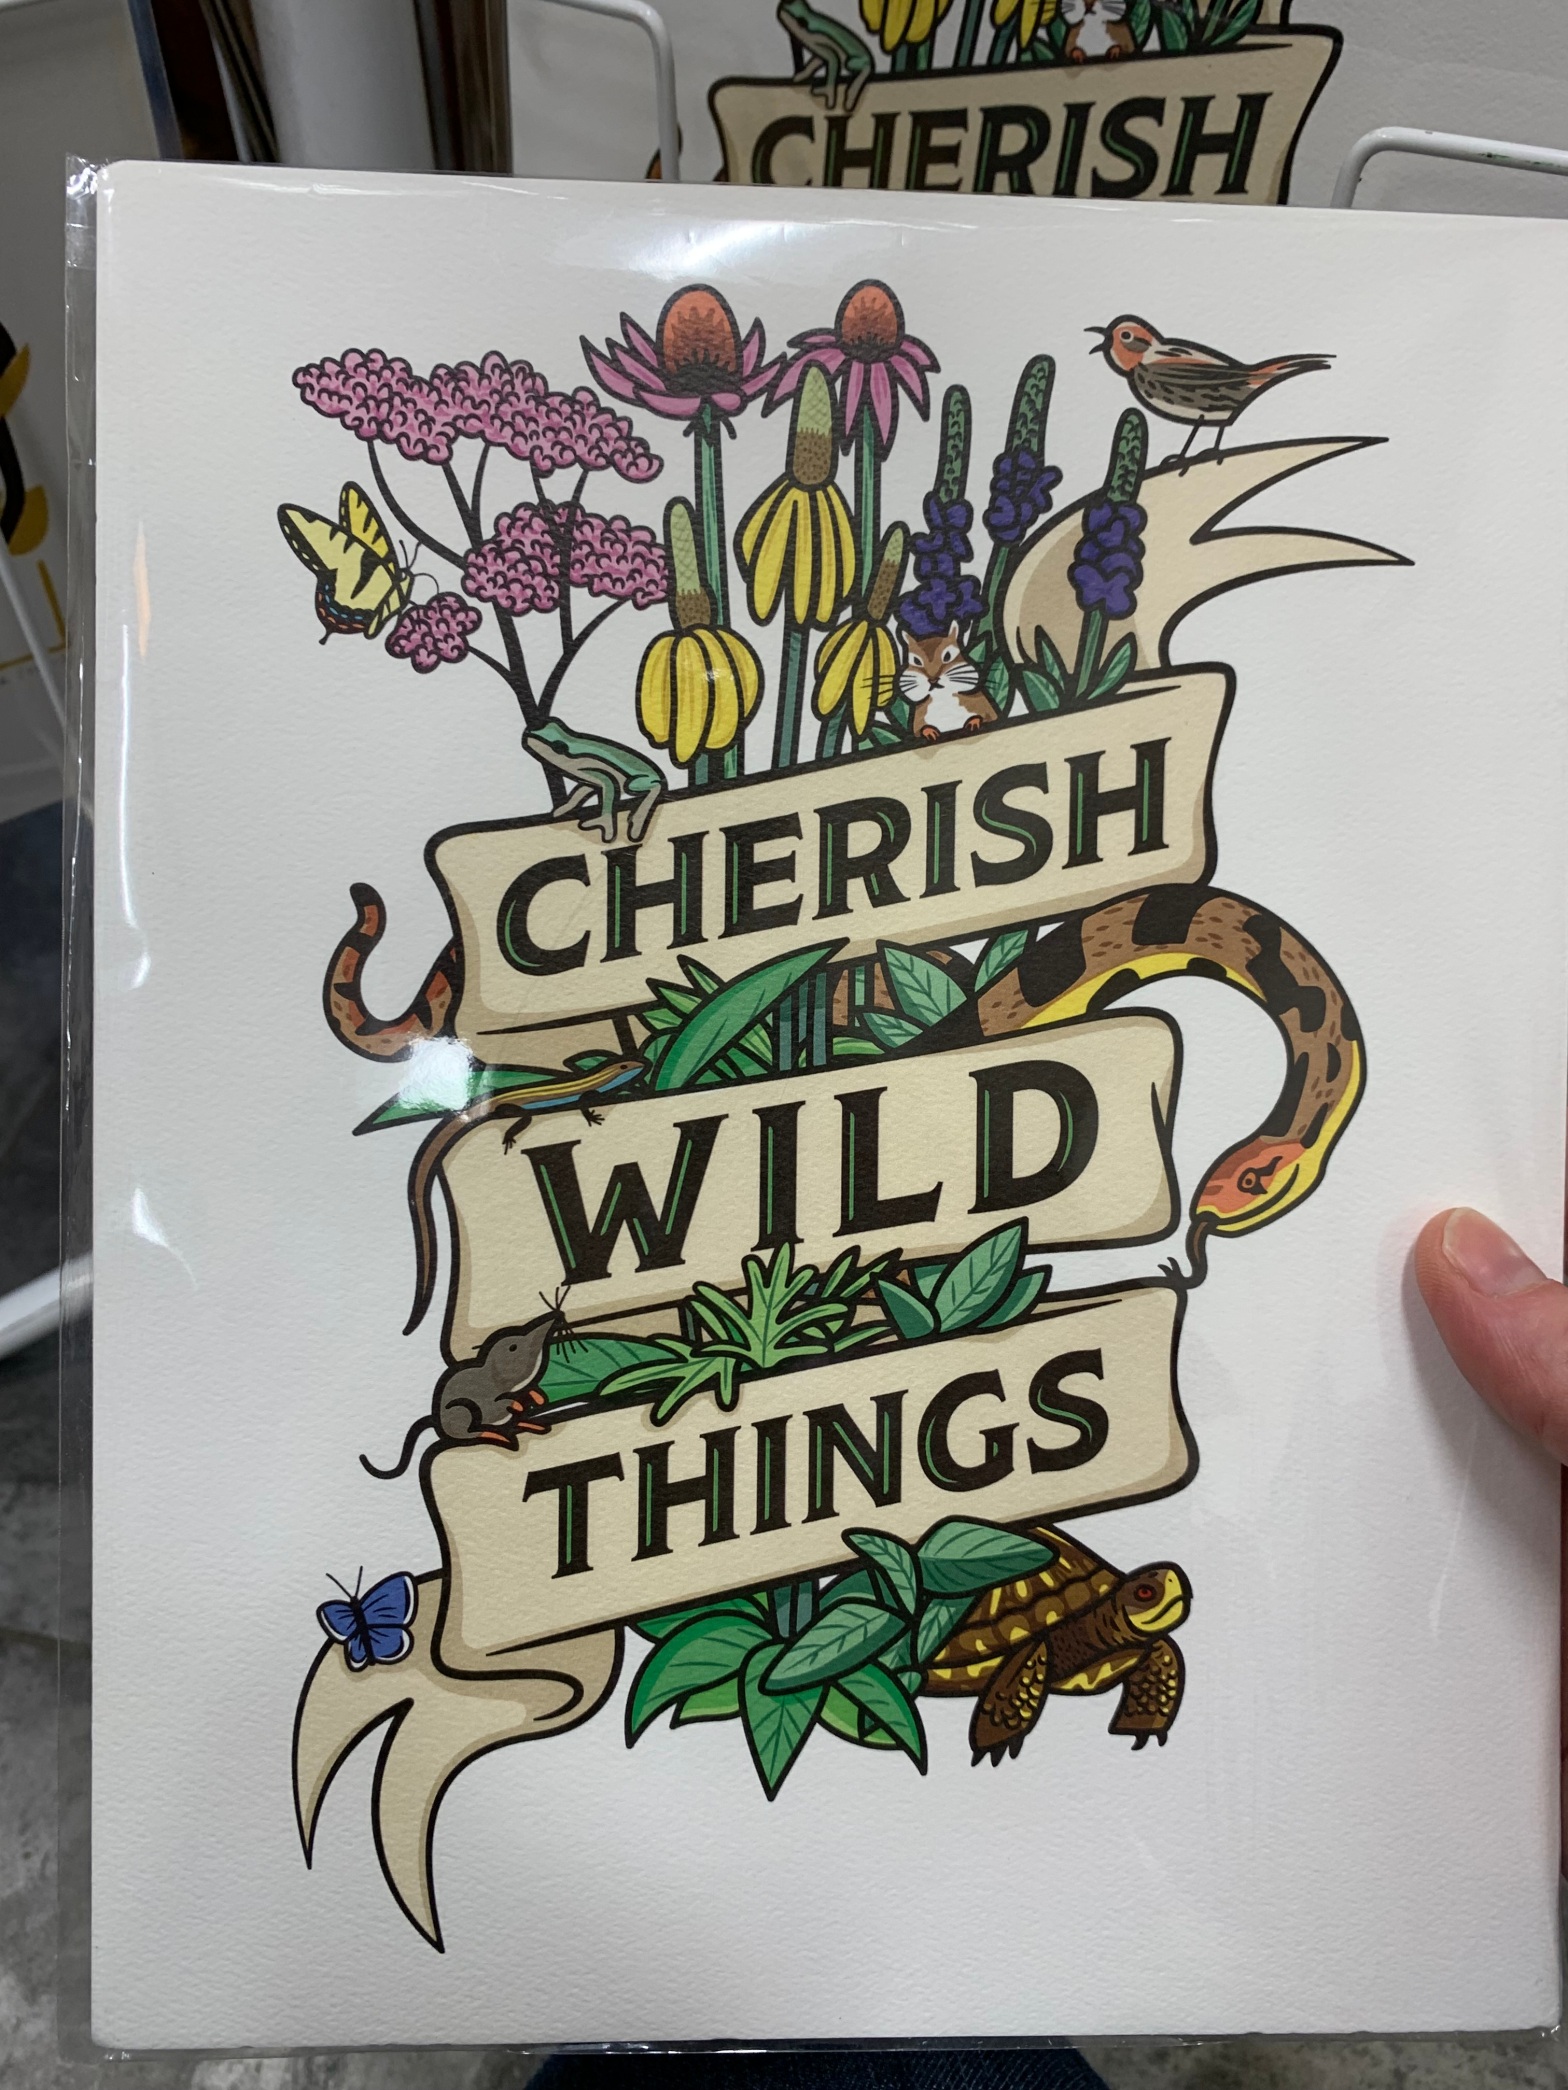 Three banners go across a bundle of wild flowers; each banner has one word of the phrase "cherish wild things." The wildflowers are different colors, and there are animals among them: snake, turtle, bird, butterfly, squirrel